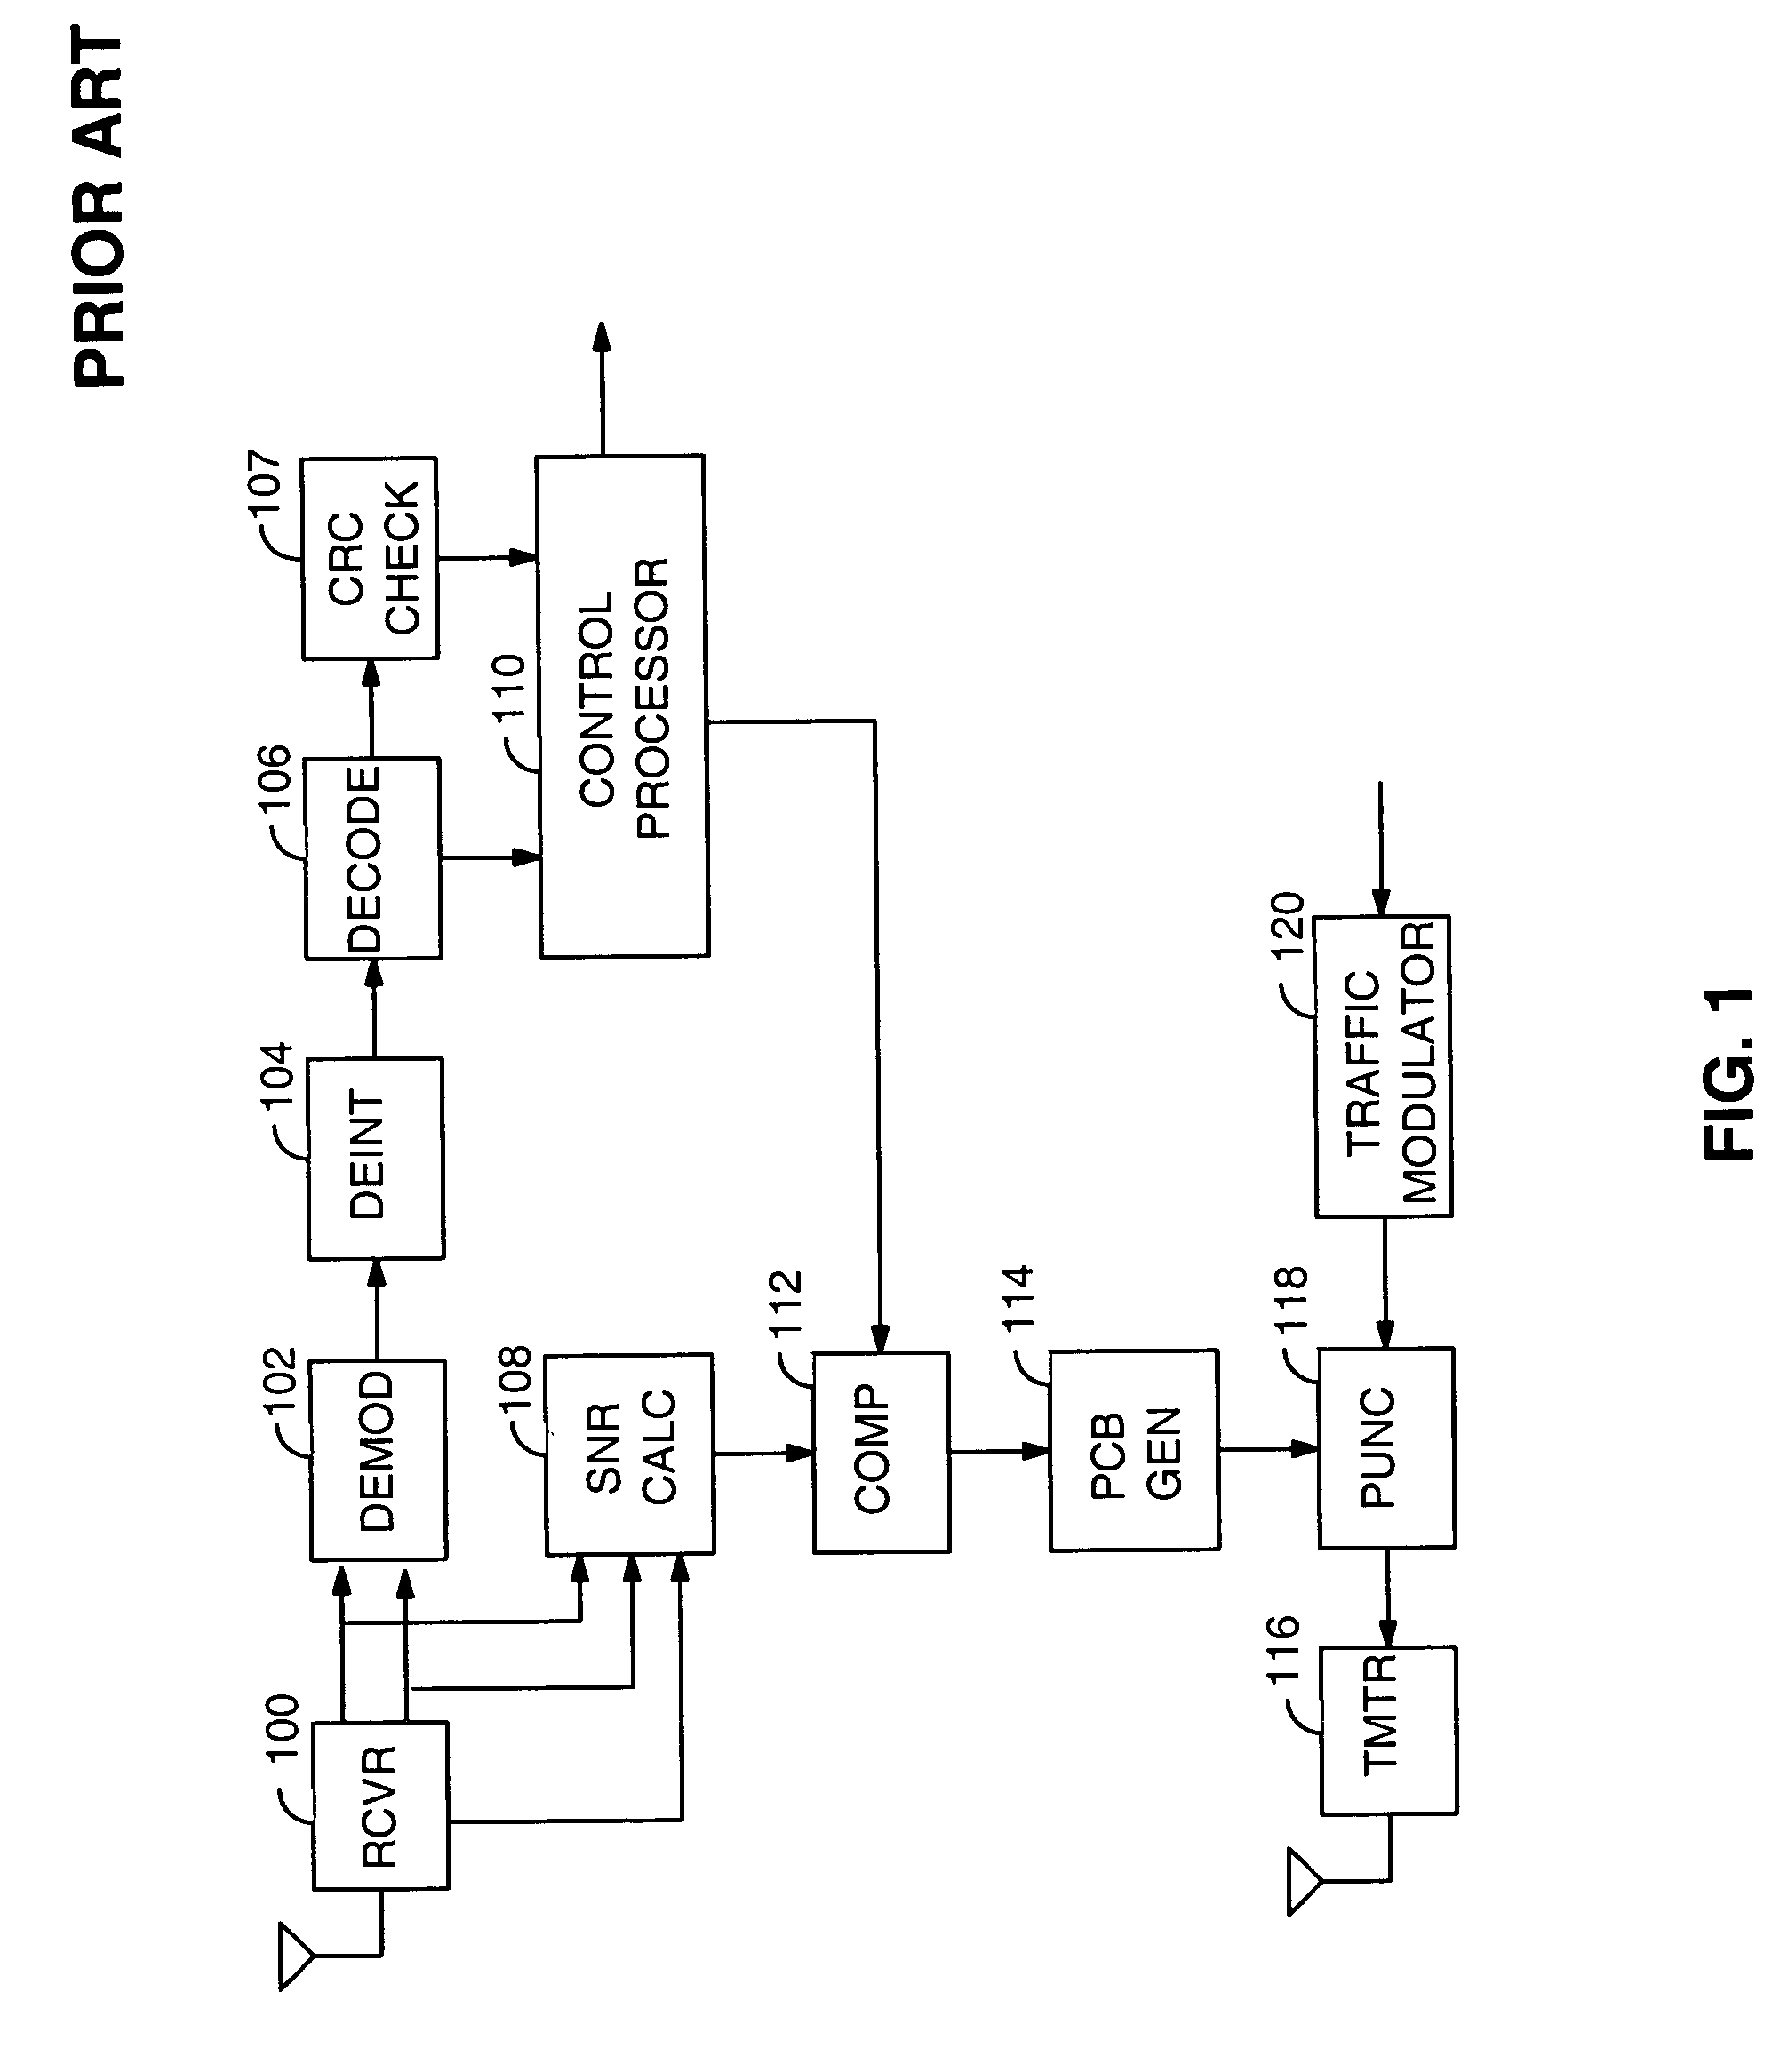 Method and apparatus for determining the closed loop power control set point in a wireless packet data communication system